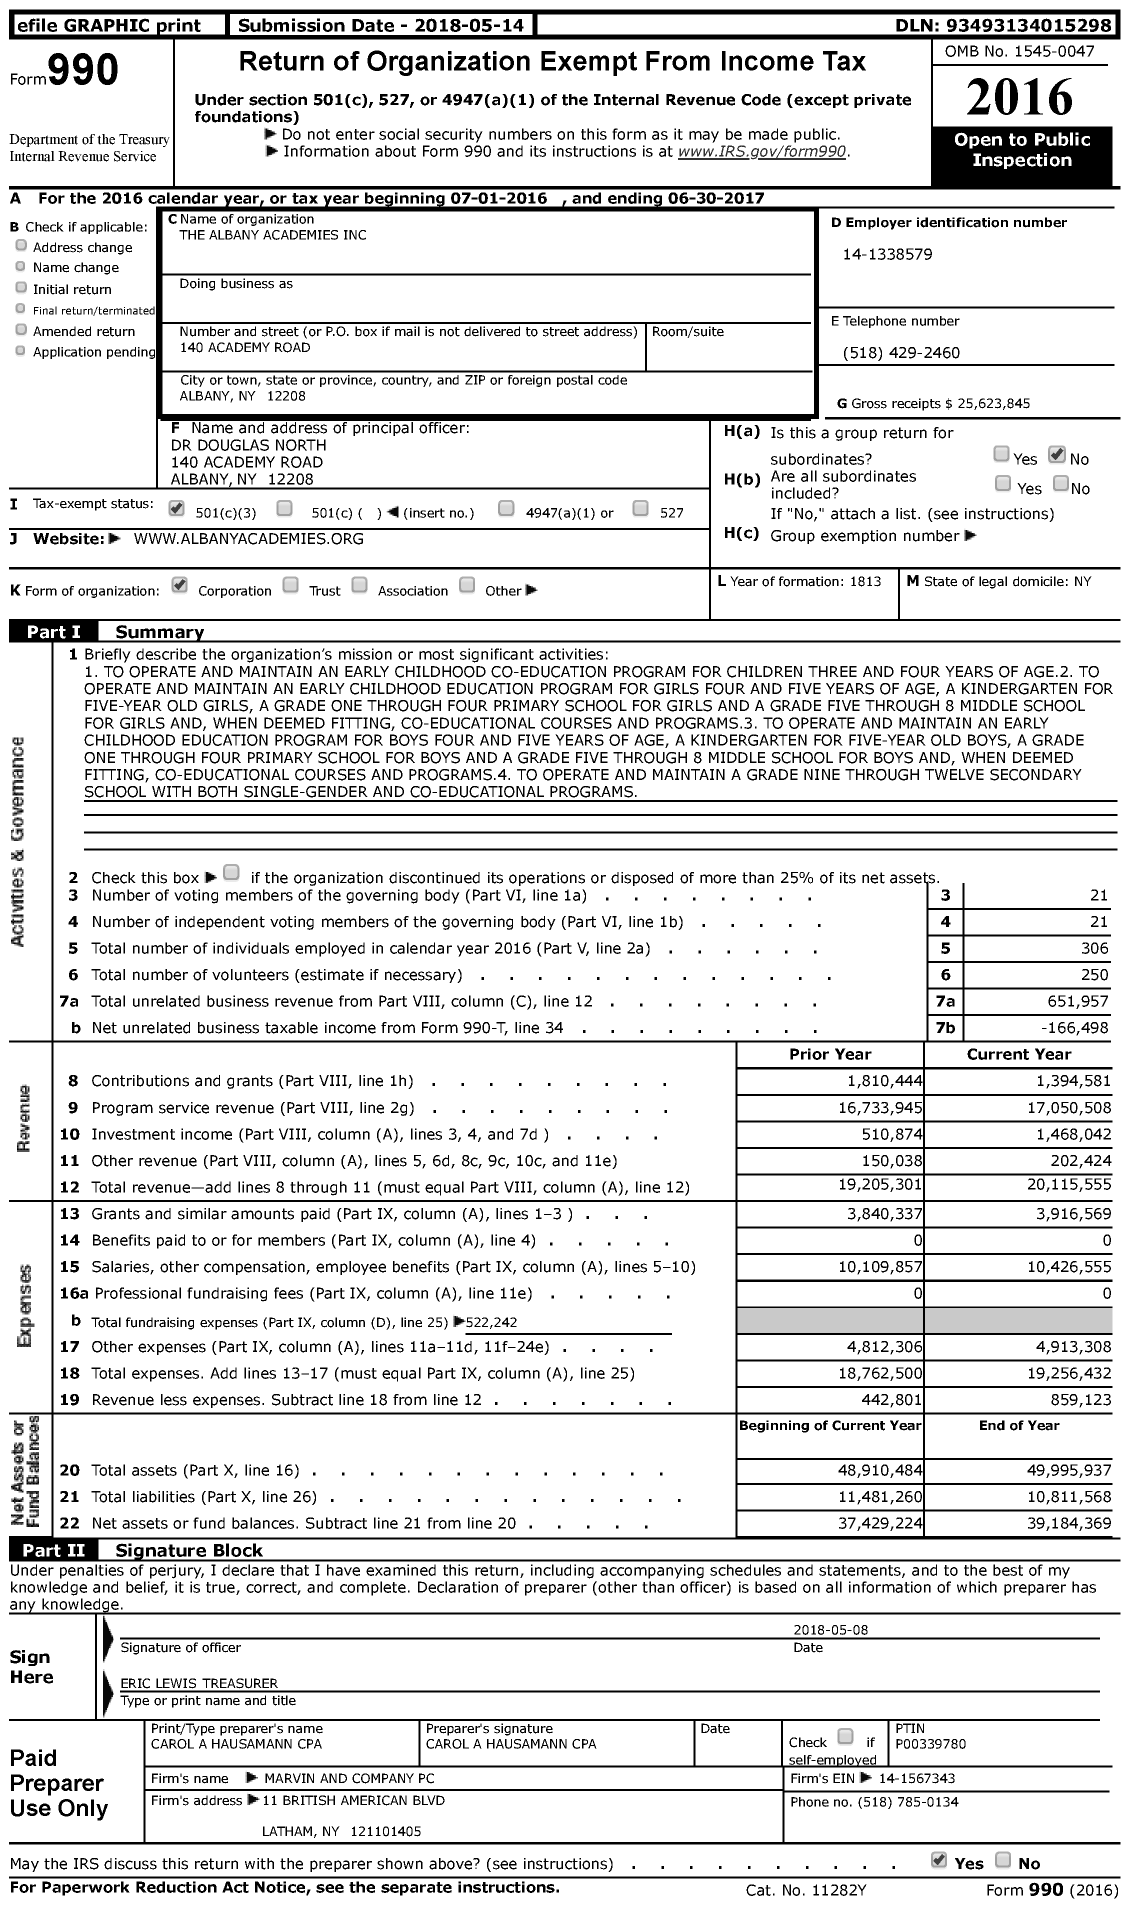 Image of first page of 2016 Form 990 for The Albany Academies